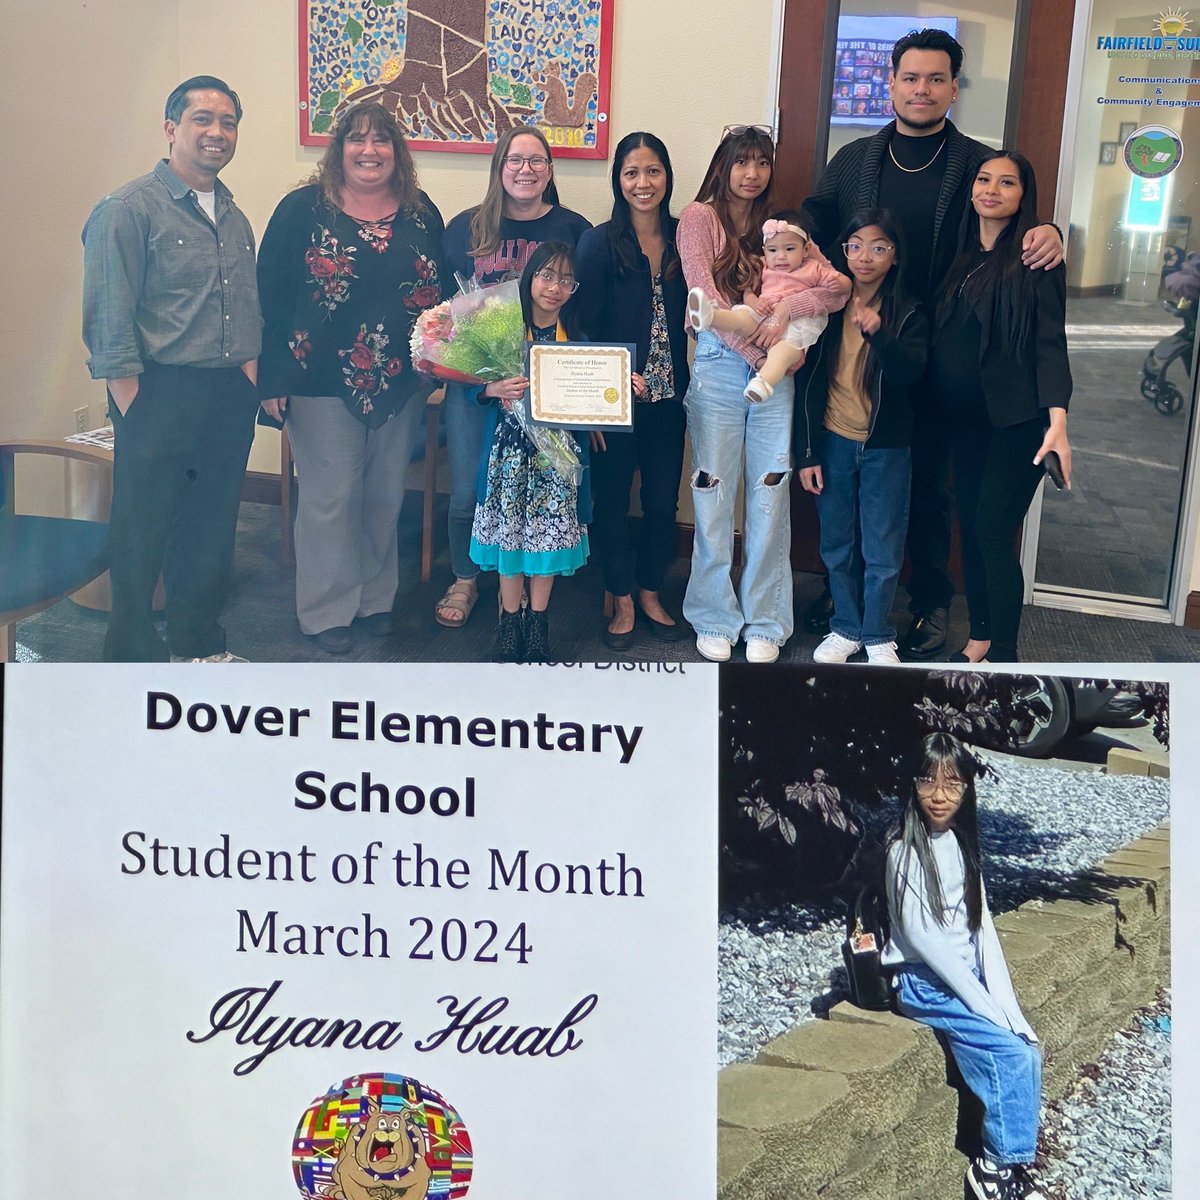 So proud of the Student of the Month @Dover_Bulldogs #rockstarstudent